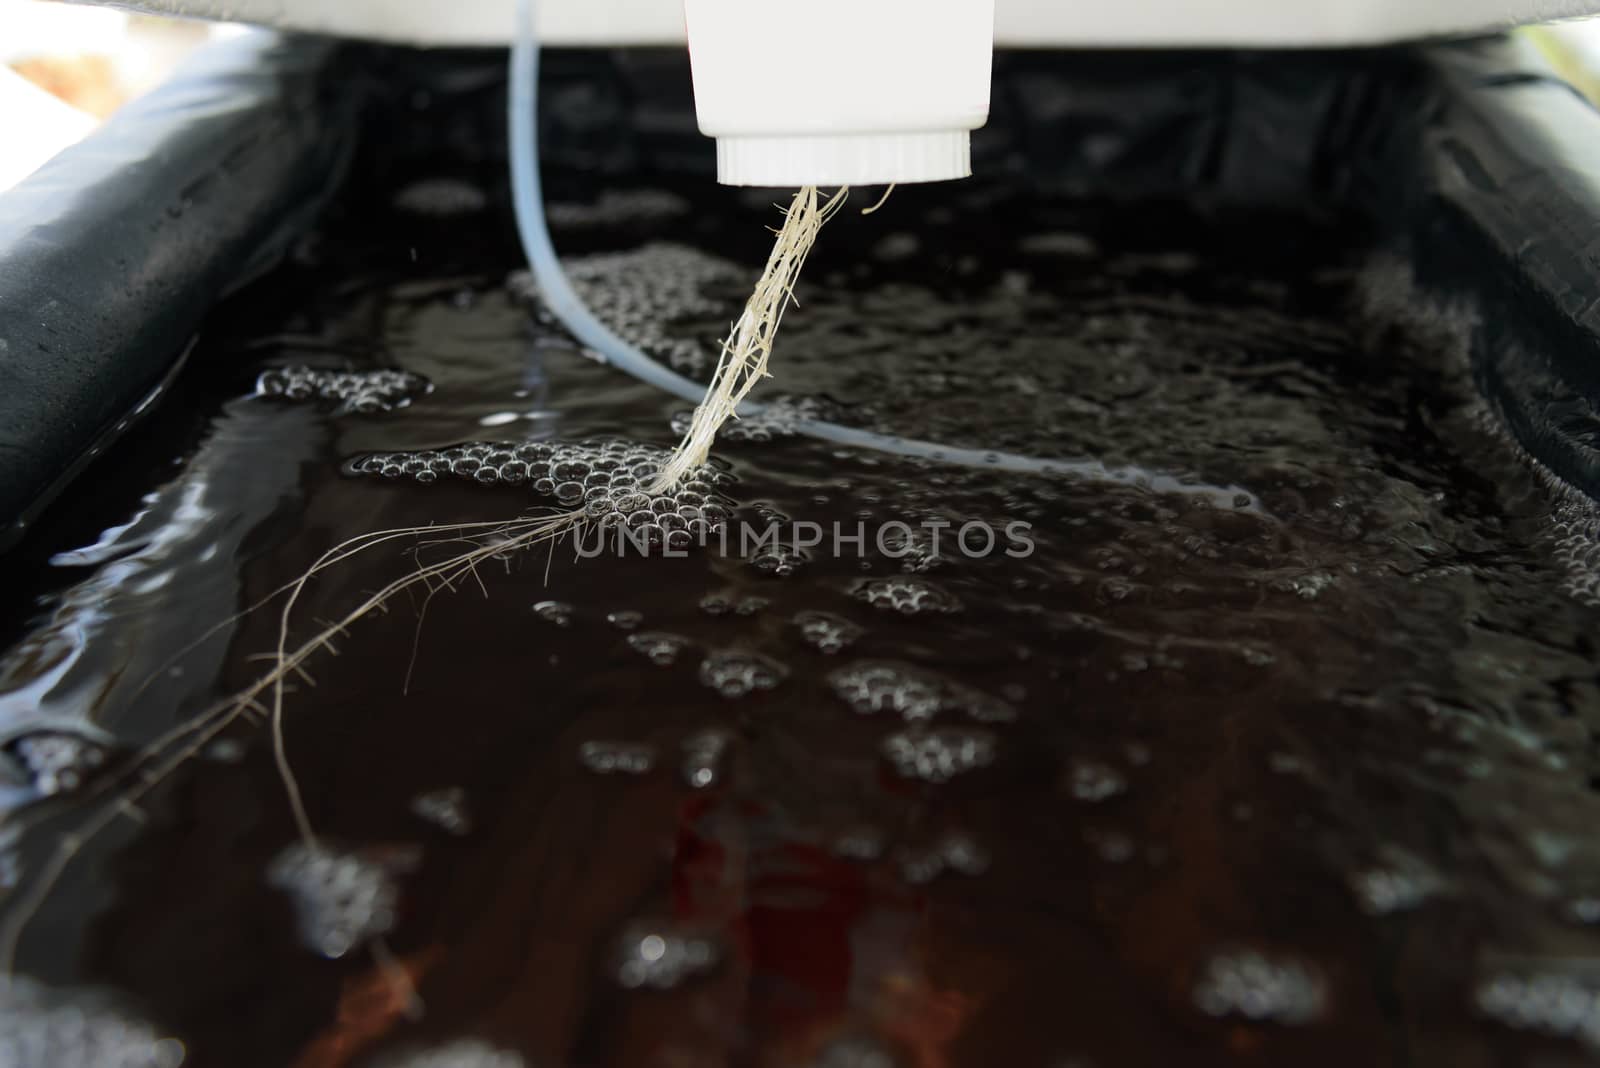 root of melon tree in the water bin of hydroponics system